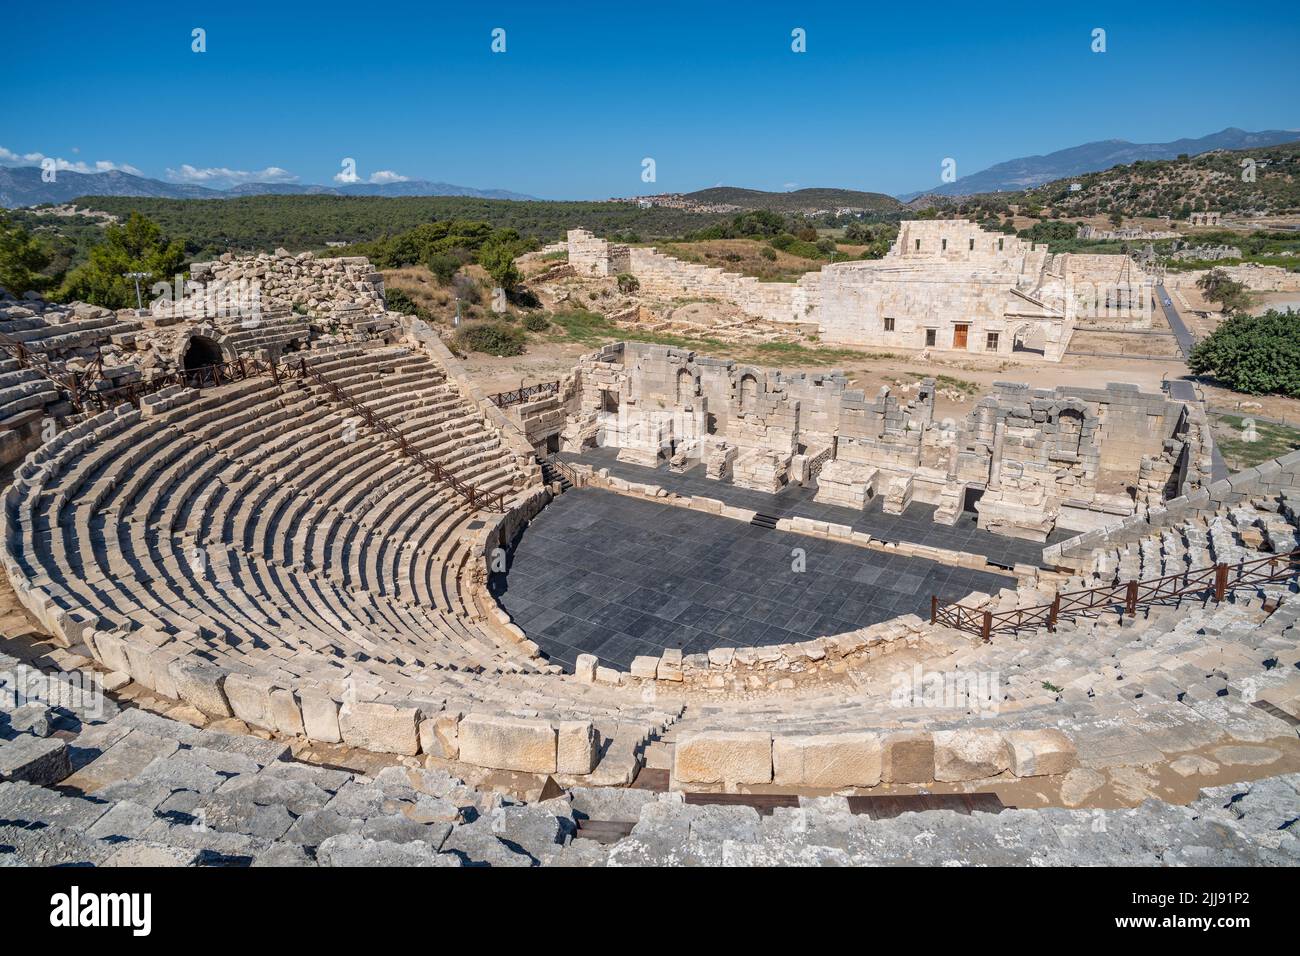 Antique Theatre in the ancient Lycian city of Patara, Turkey. Stock Photo